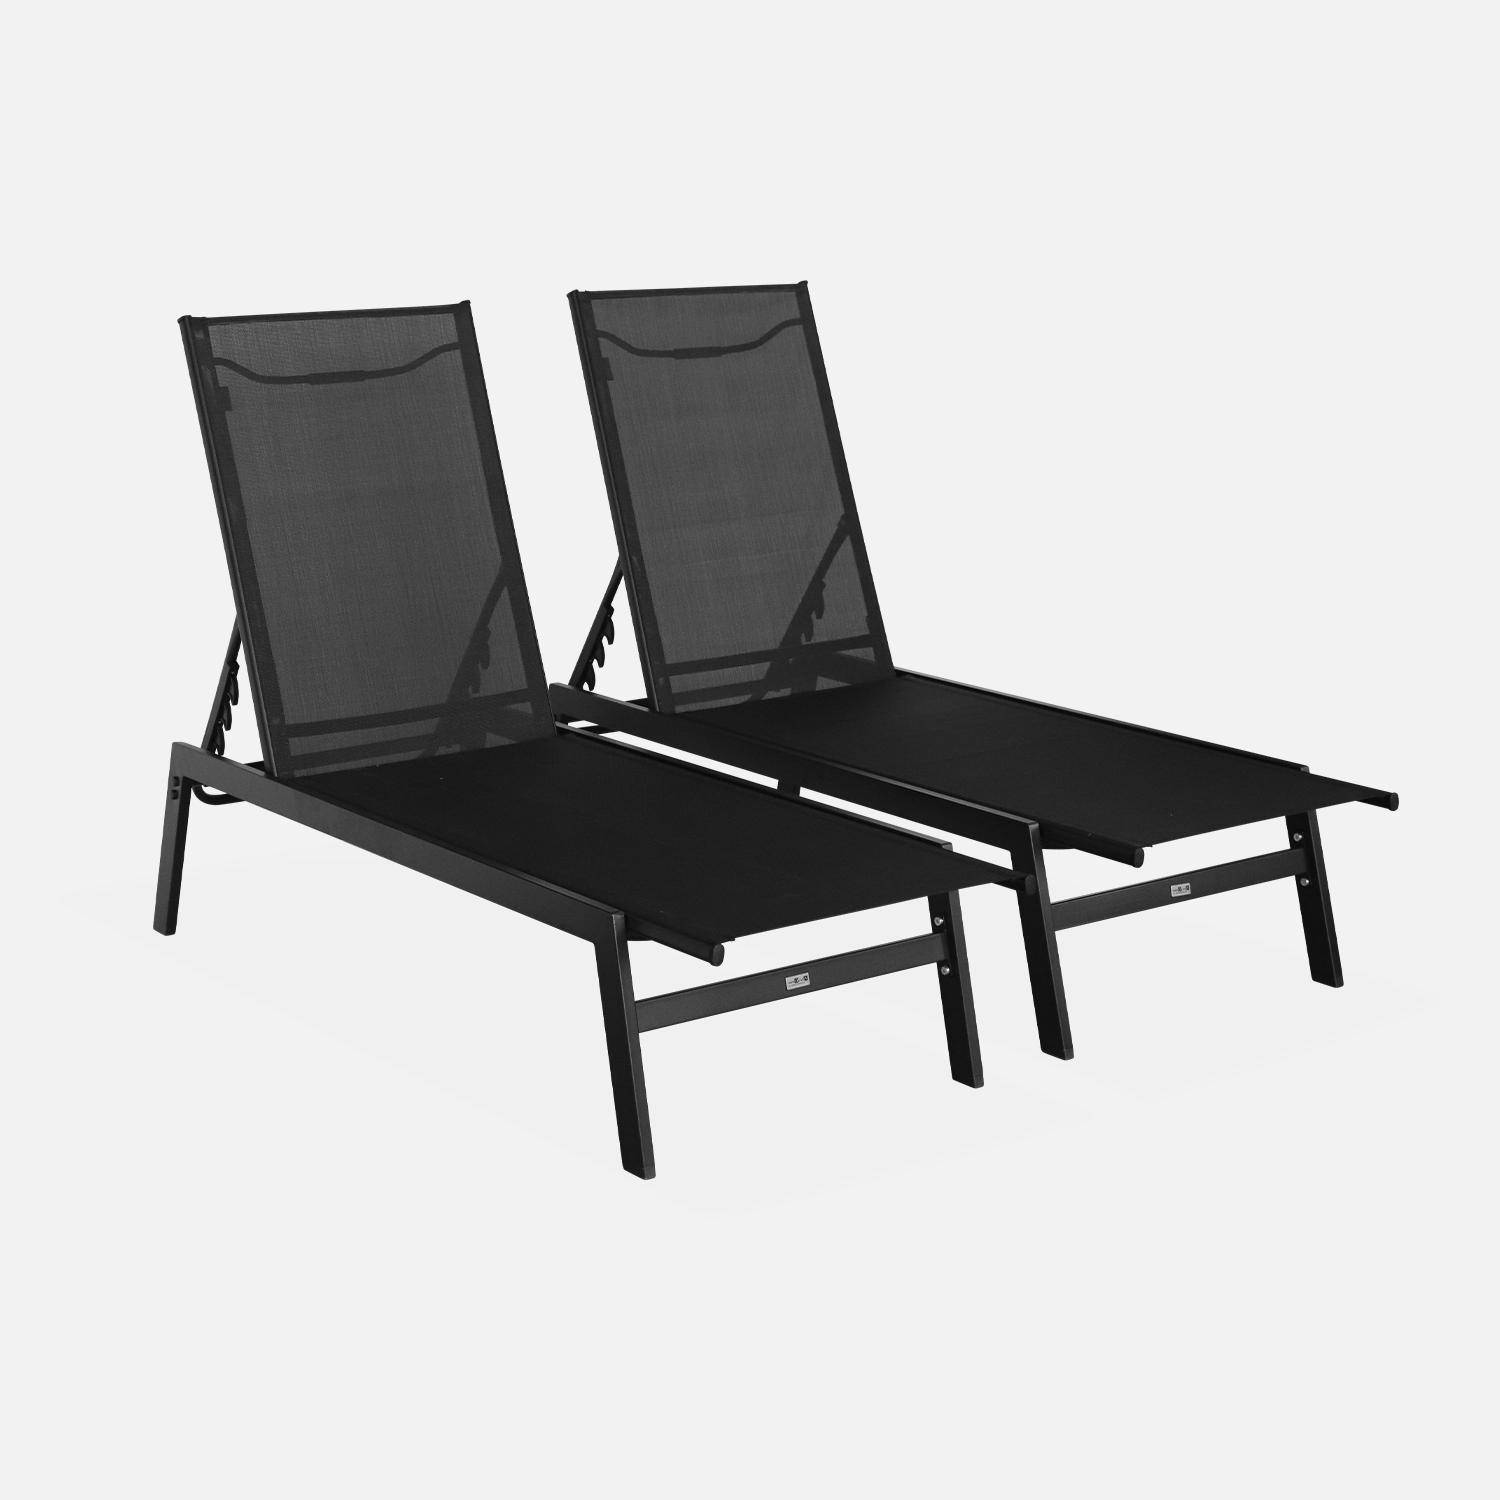 Pair of Textilene and Metal Multi-Position Sun Loungers, Black Photo3